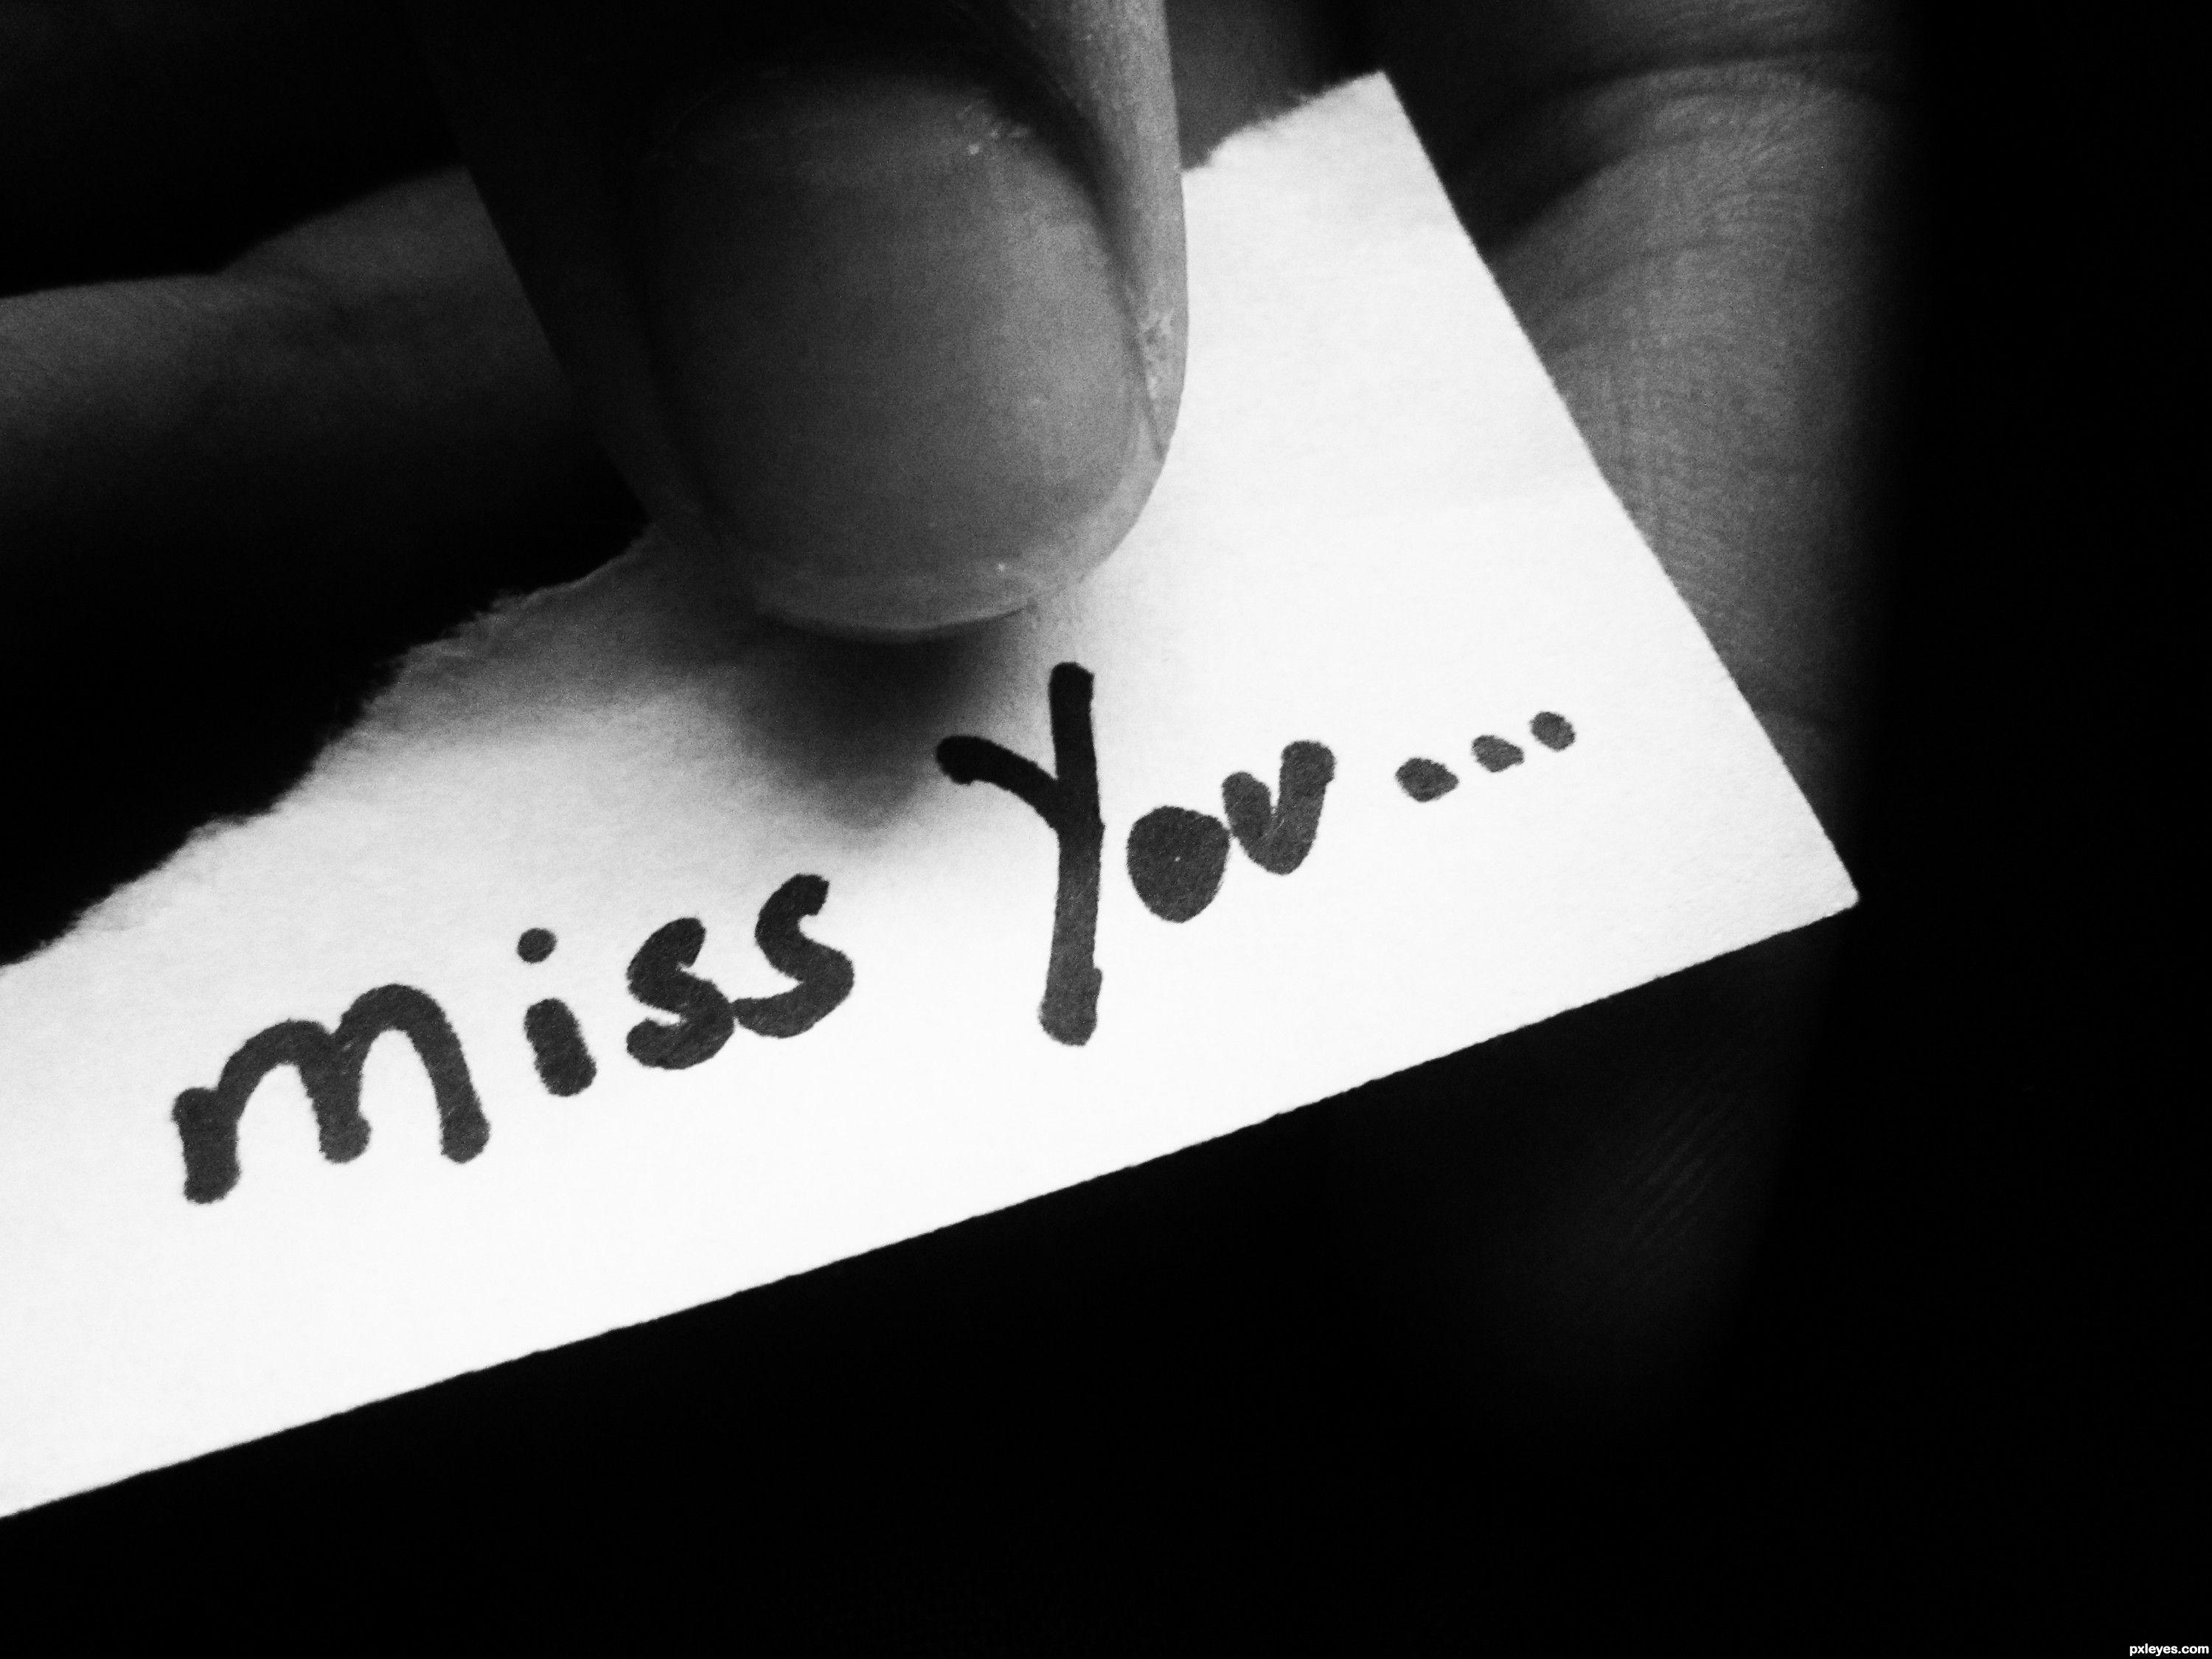 Paper Miss You Most HD Wallpaper 1920×1080 Resolution, HQ